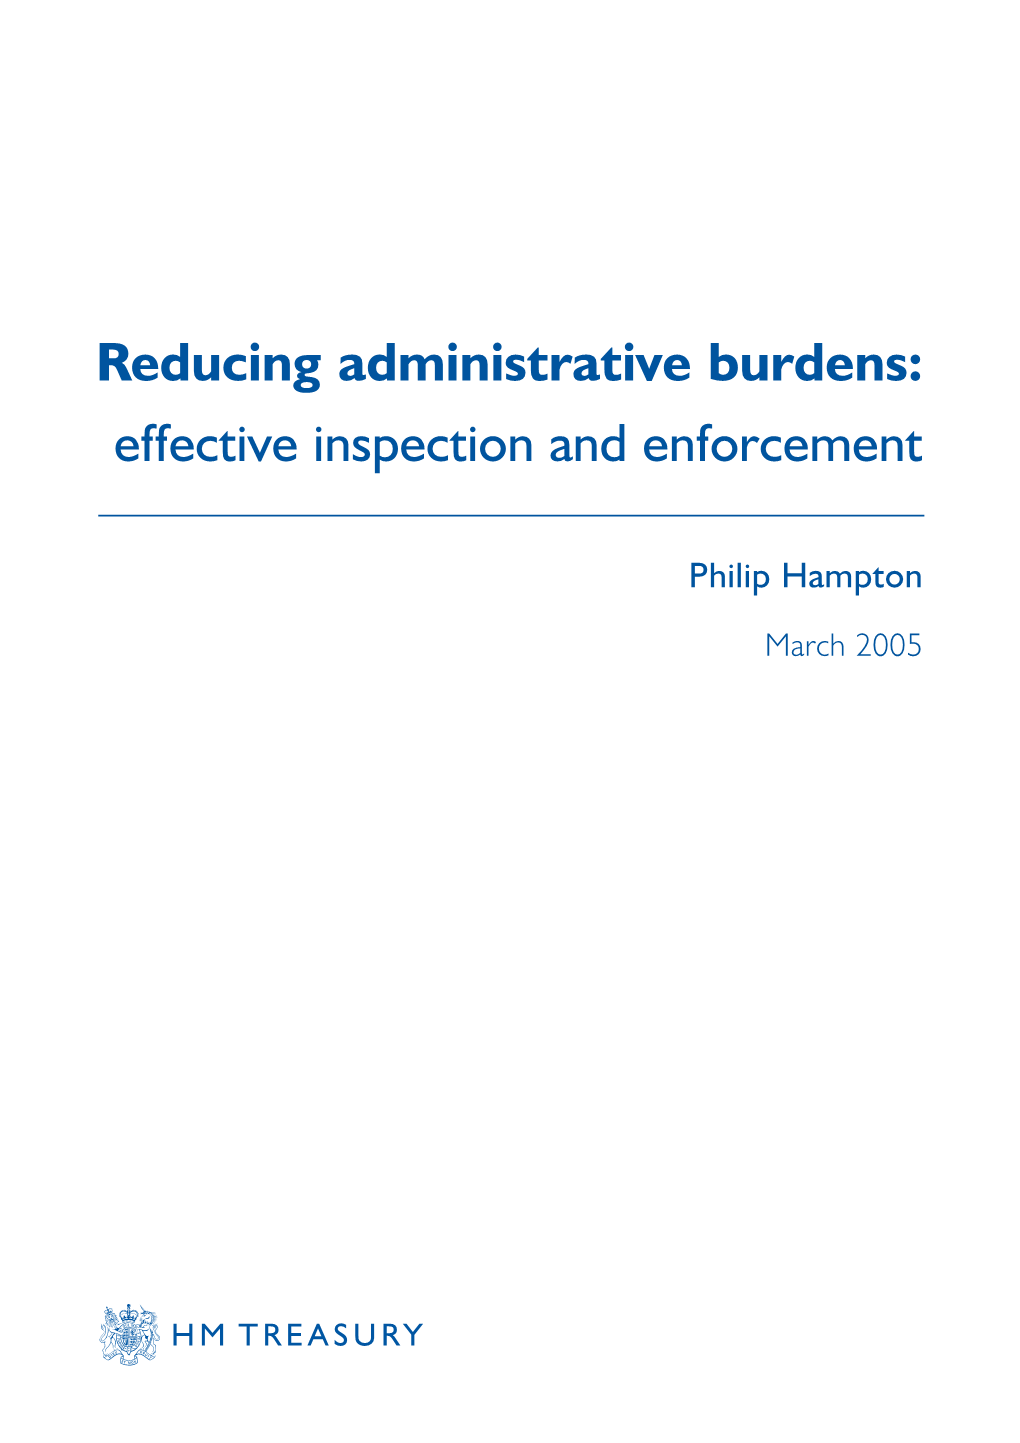 Reducing Administrative Burdens: Effective Inspection and Enforcement